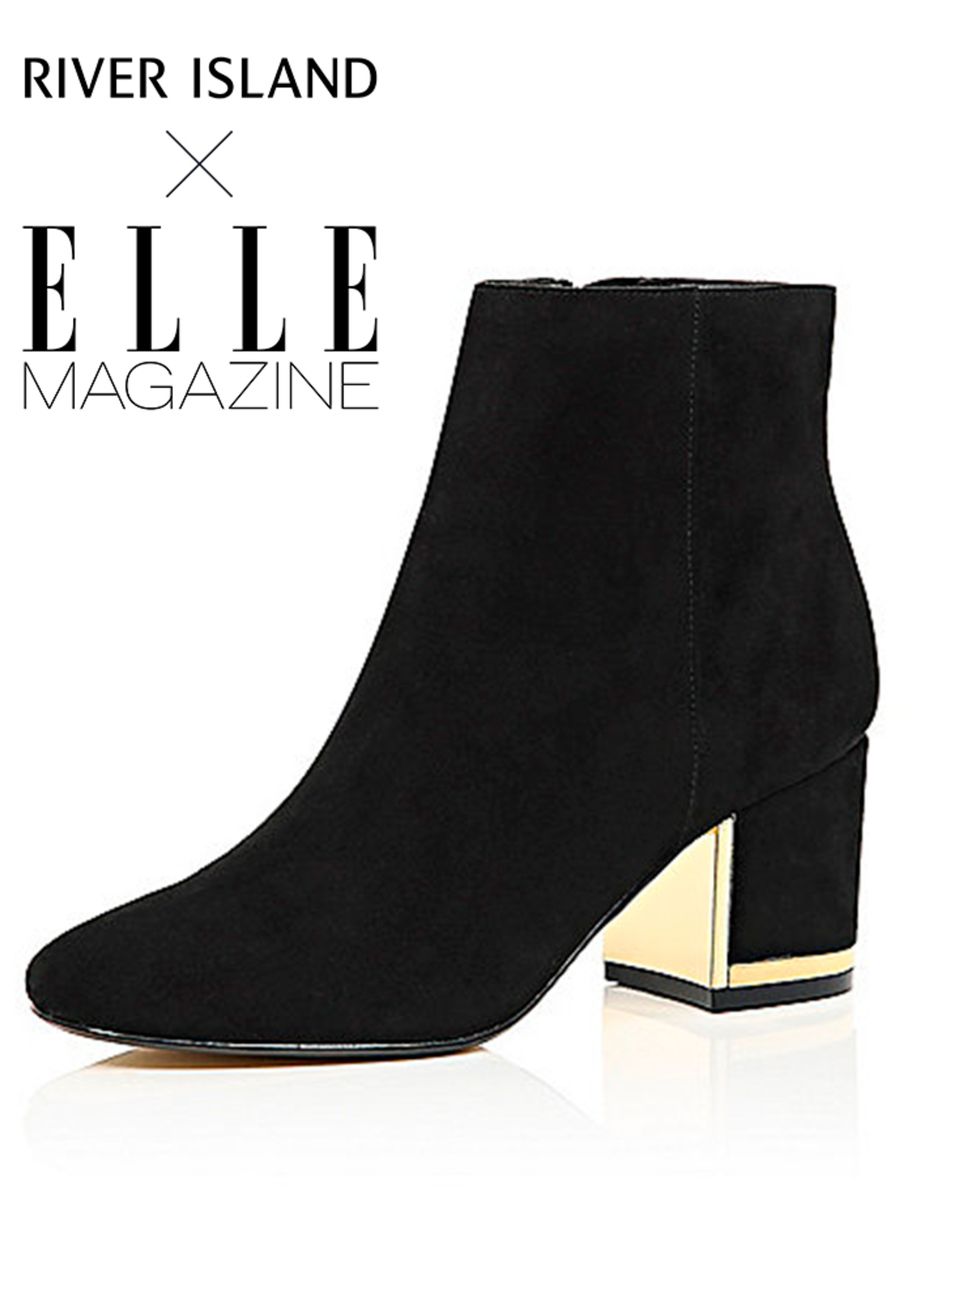 <p><a href="http://www.riverisland.com/women/shoes--boots/ankle-boots/black-suede-block-heel-boots-670571" style="line-height: 1.6;" target="_blank">River Island</a><span style="line-height:1.6"> boots, £65 (£48.75 with your 25% off River Island card)</sp